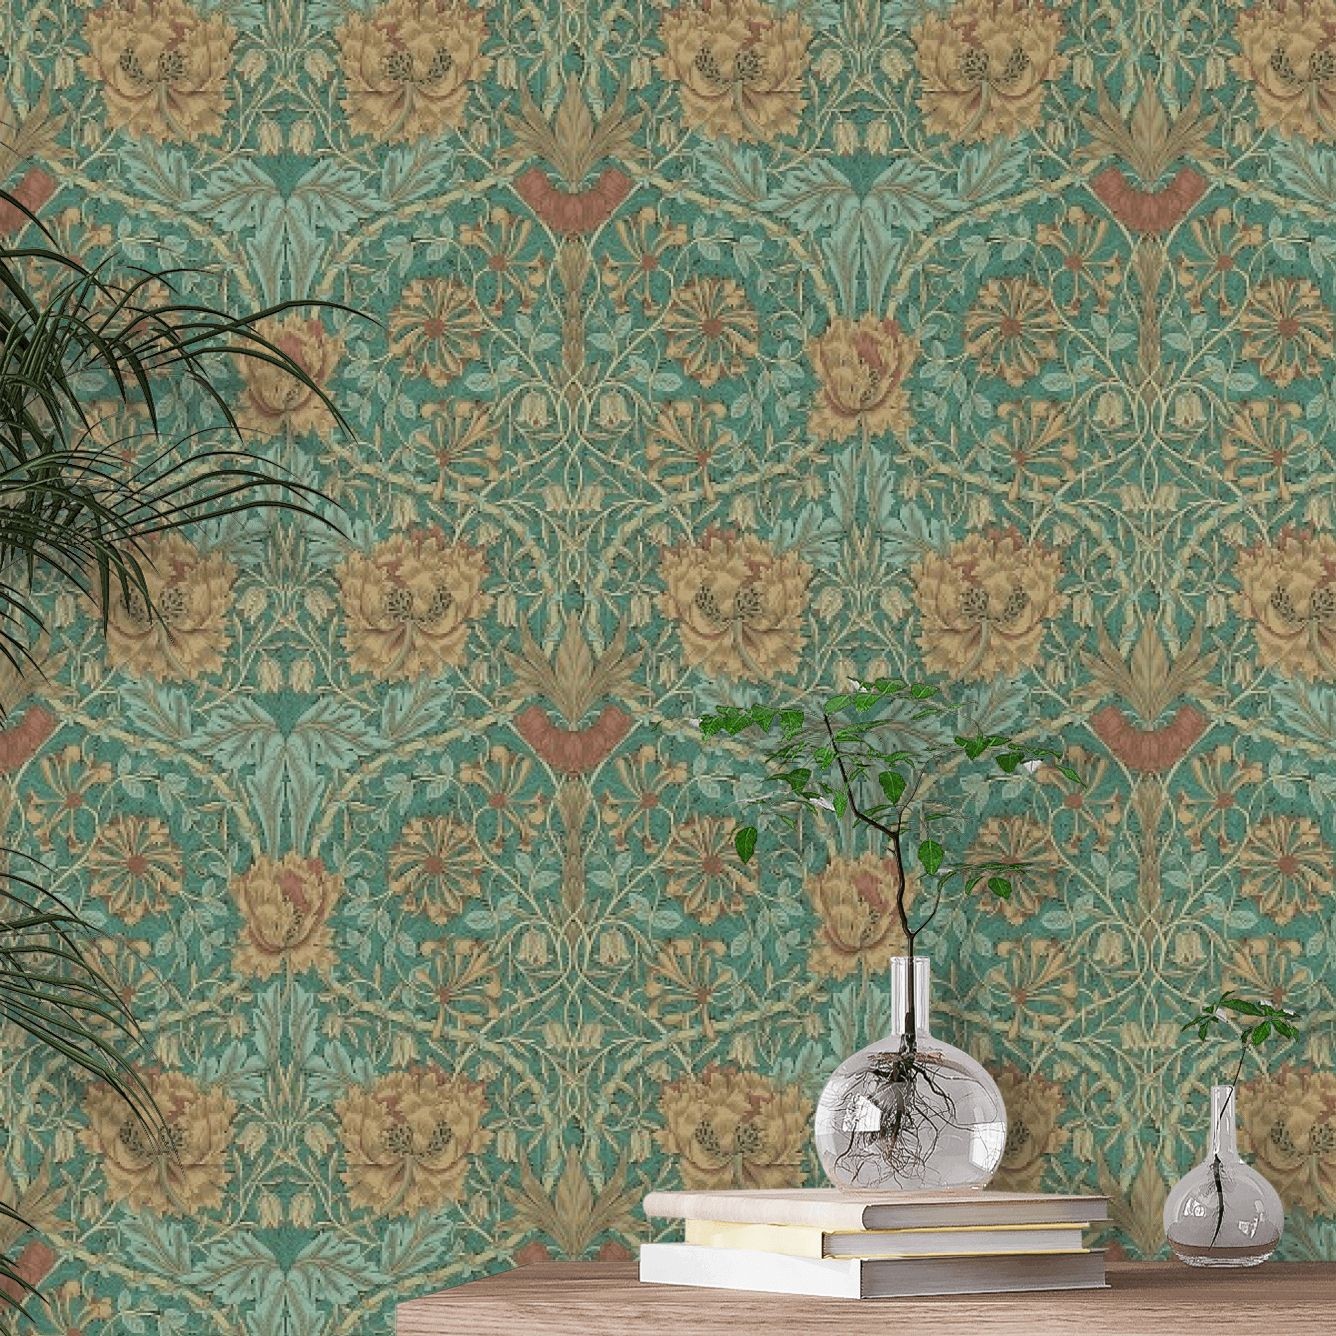 Honeysuckle and Tulip Wallpaper - Emerald/Russet - By Morris and Co